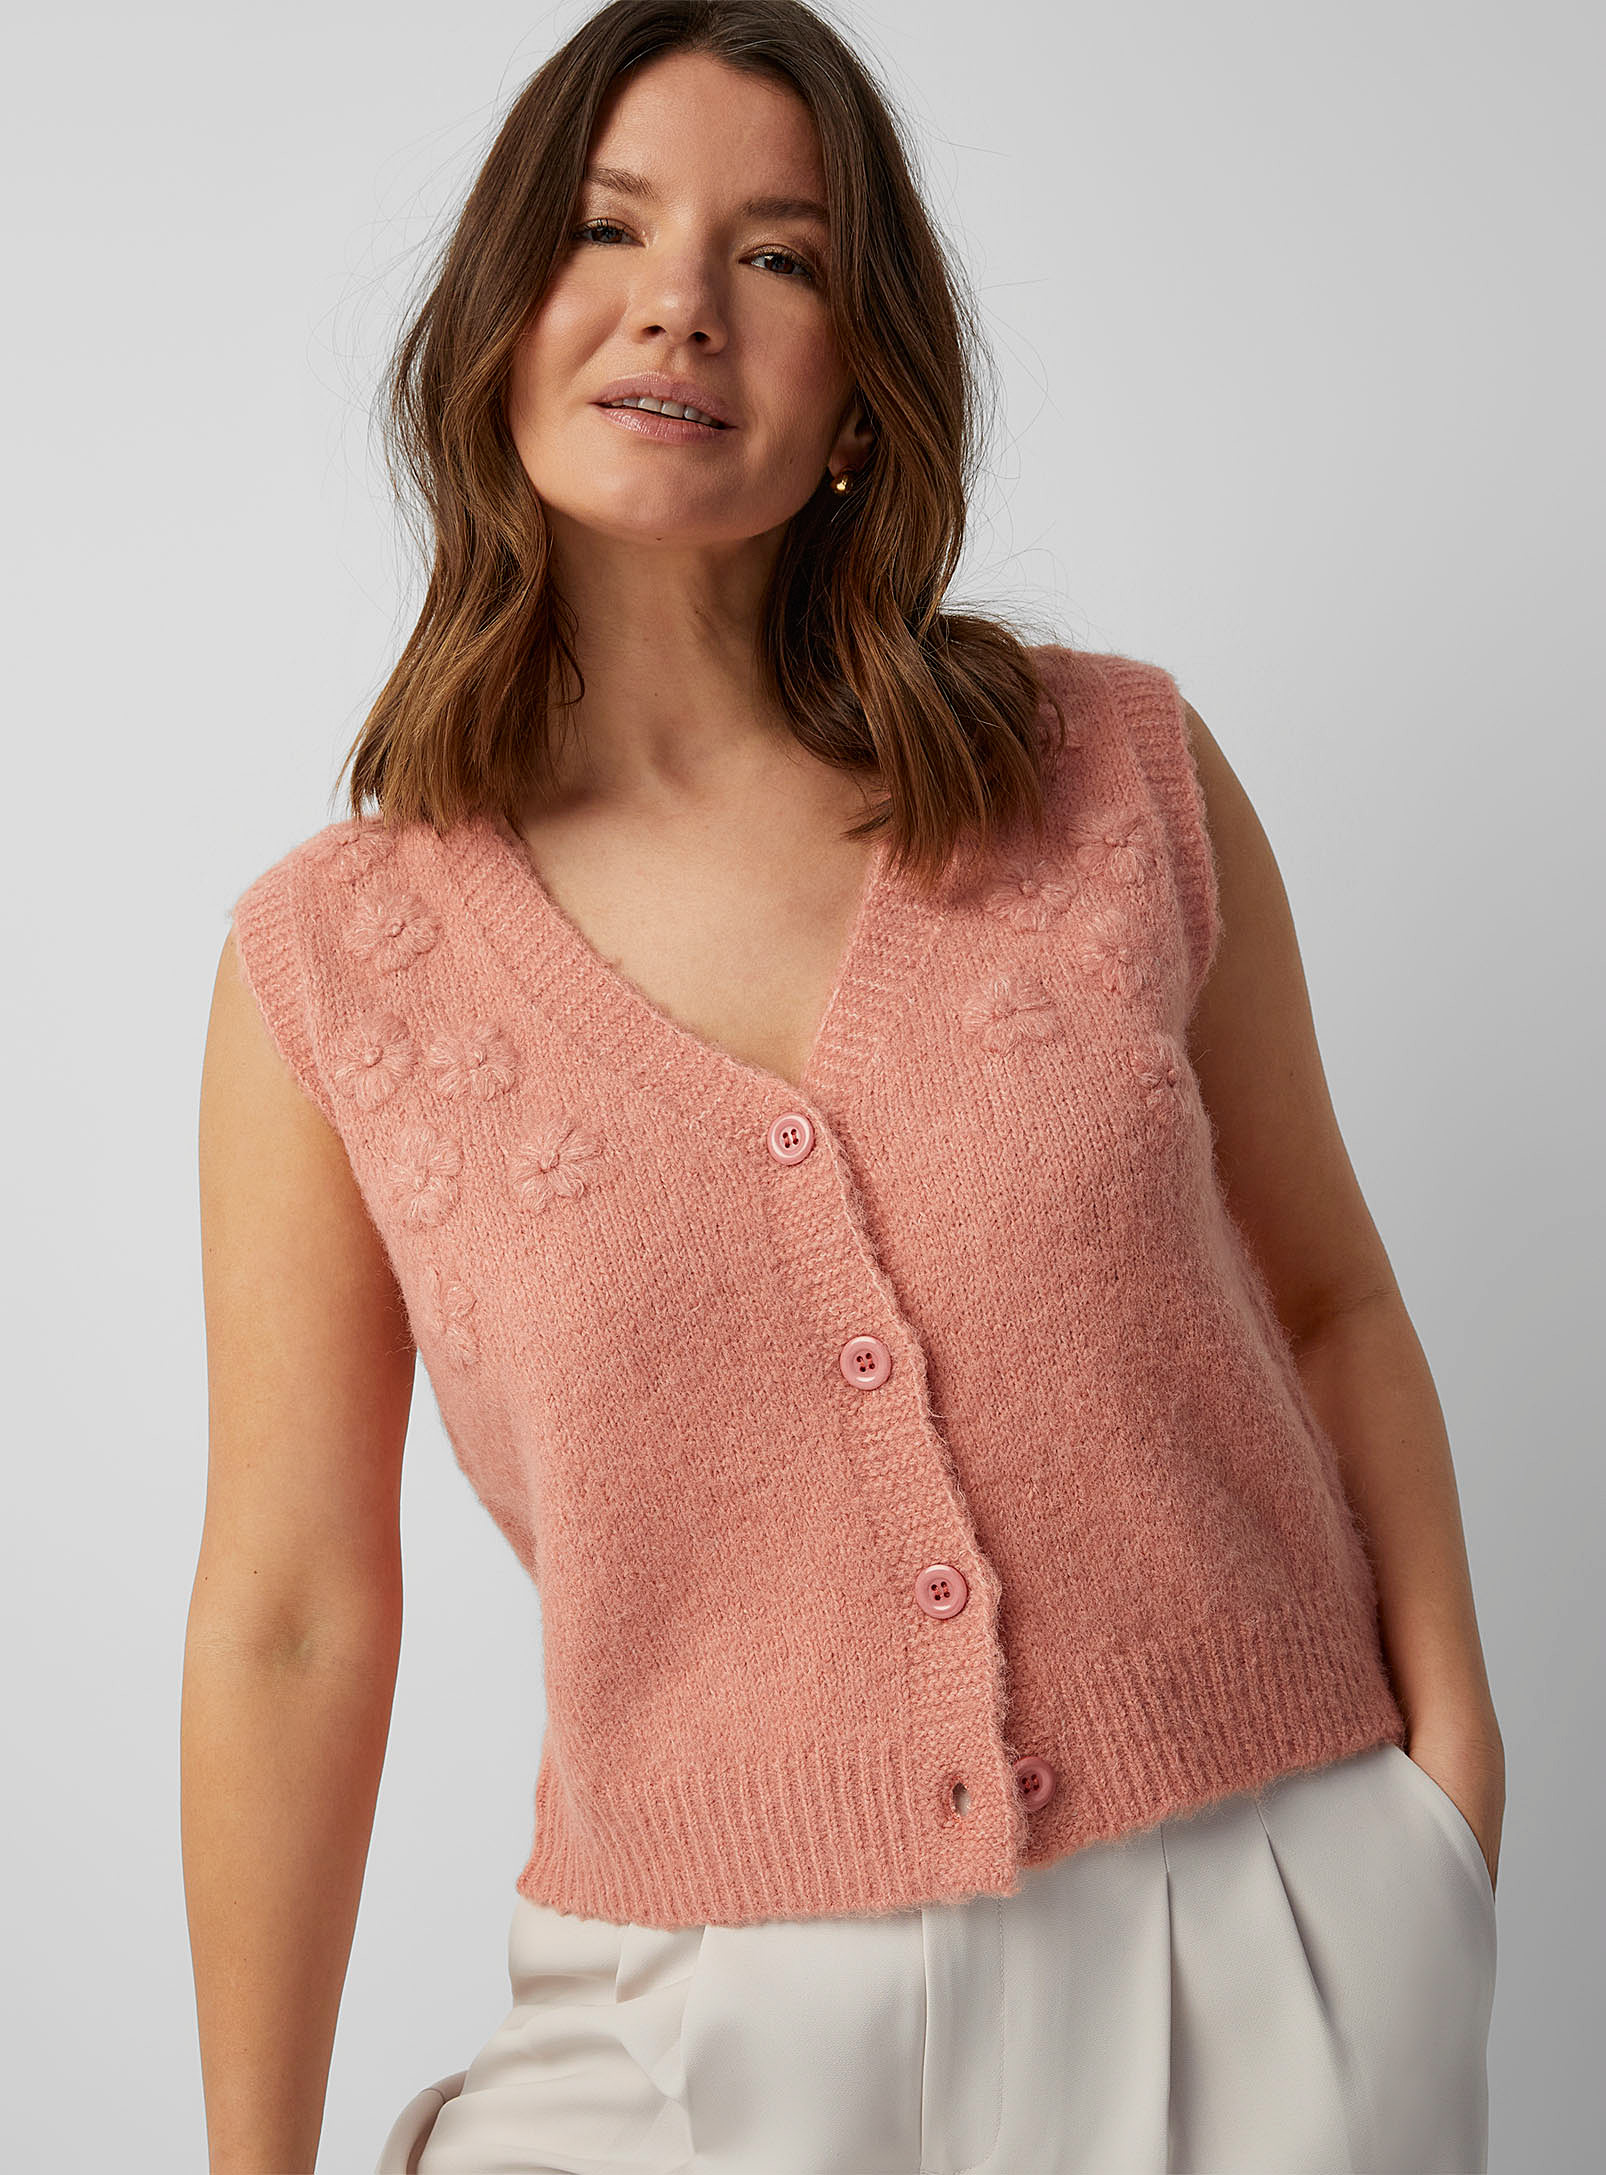 Contemporaine Embroidered Flowers Buttoned Sweater Vest In Dusky Pink